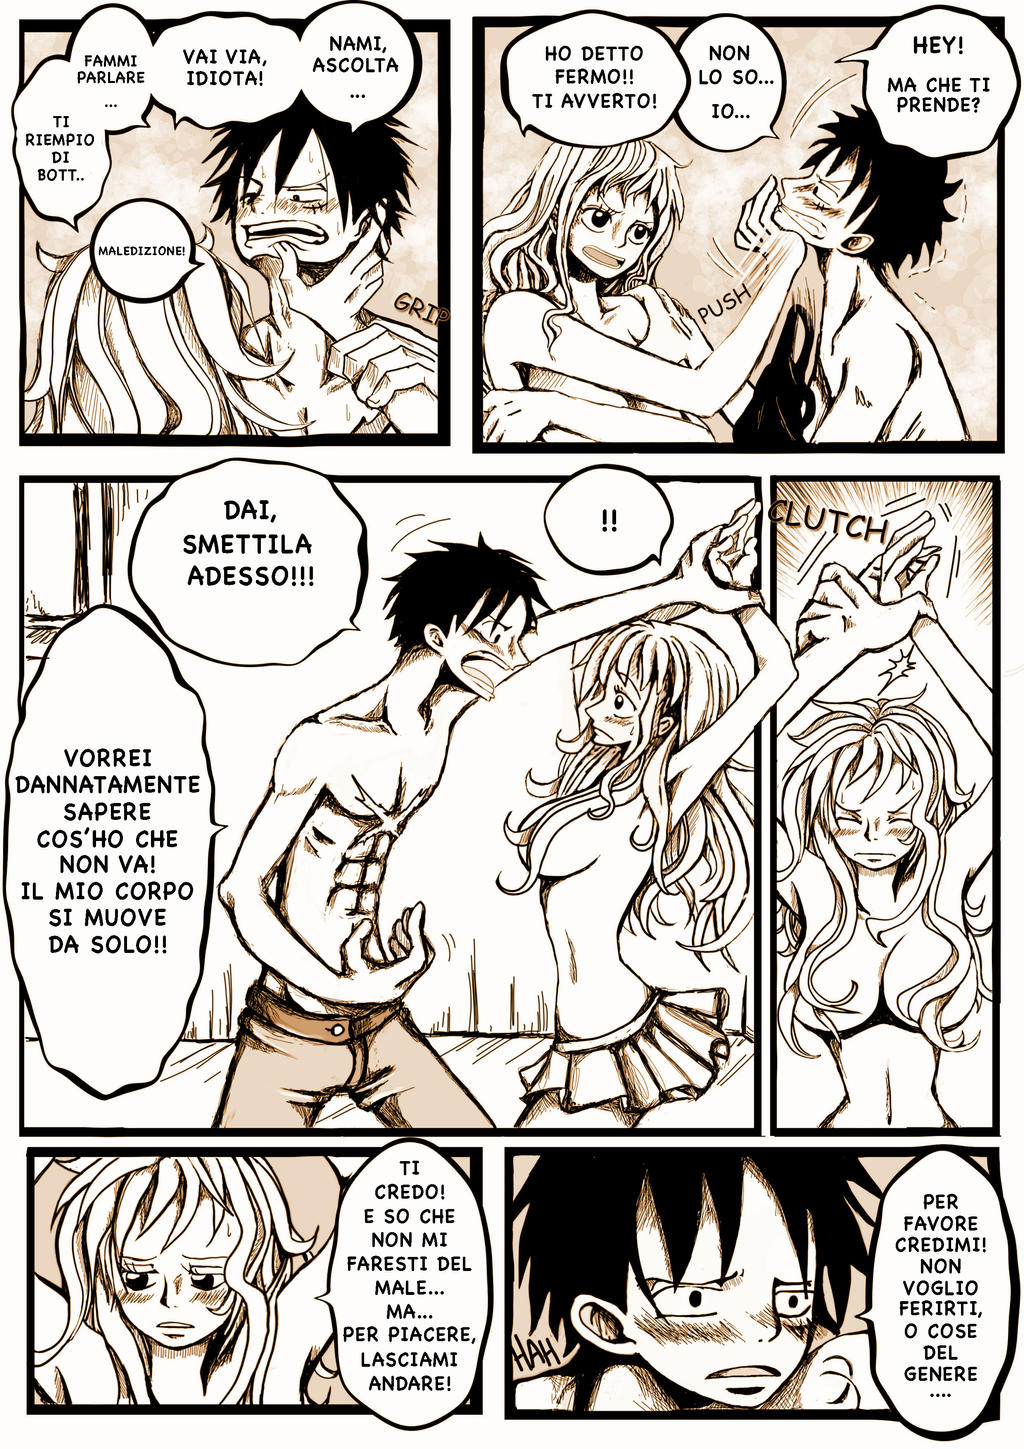 Sign of Affection, page 23 - Italian Translation